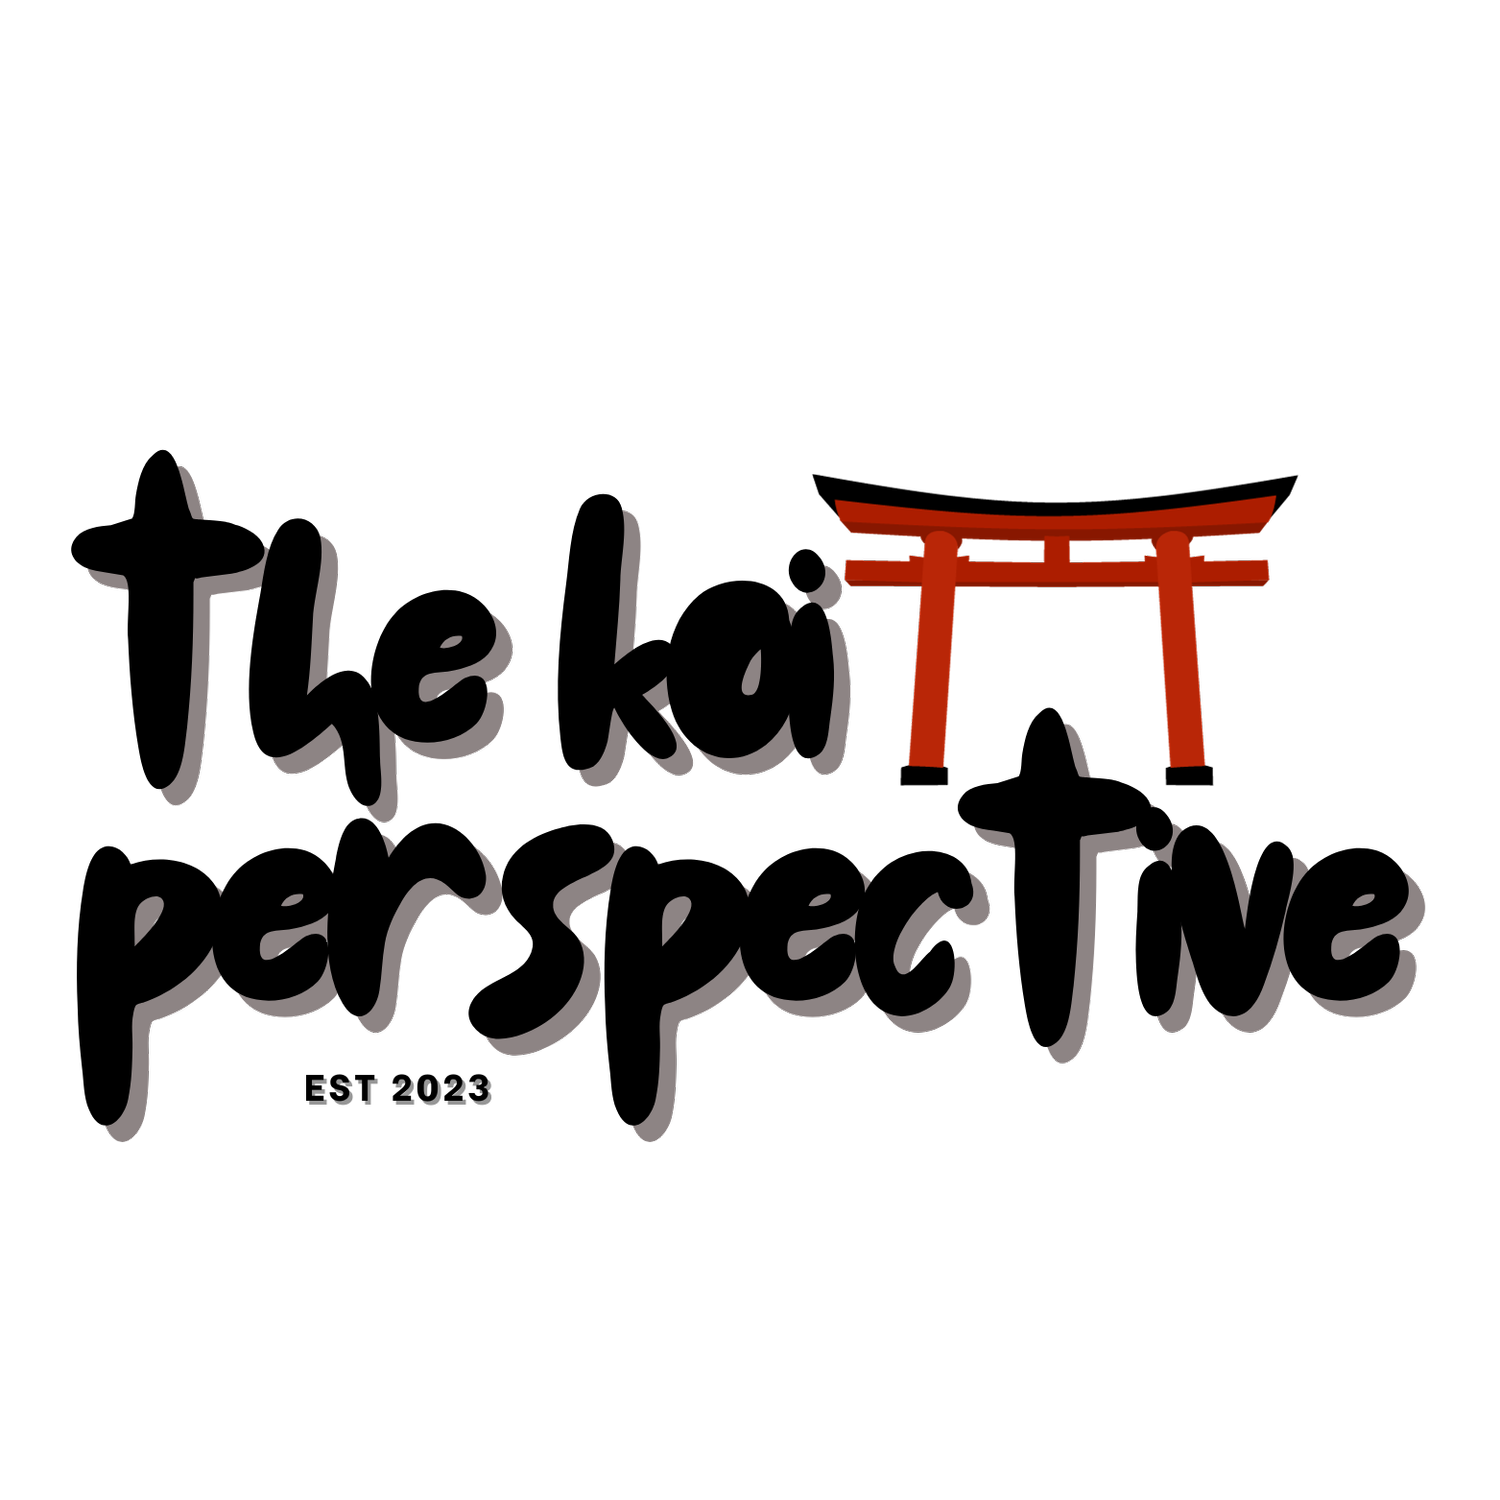 The Koi Perspective